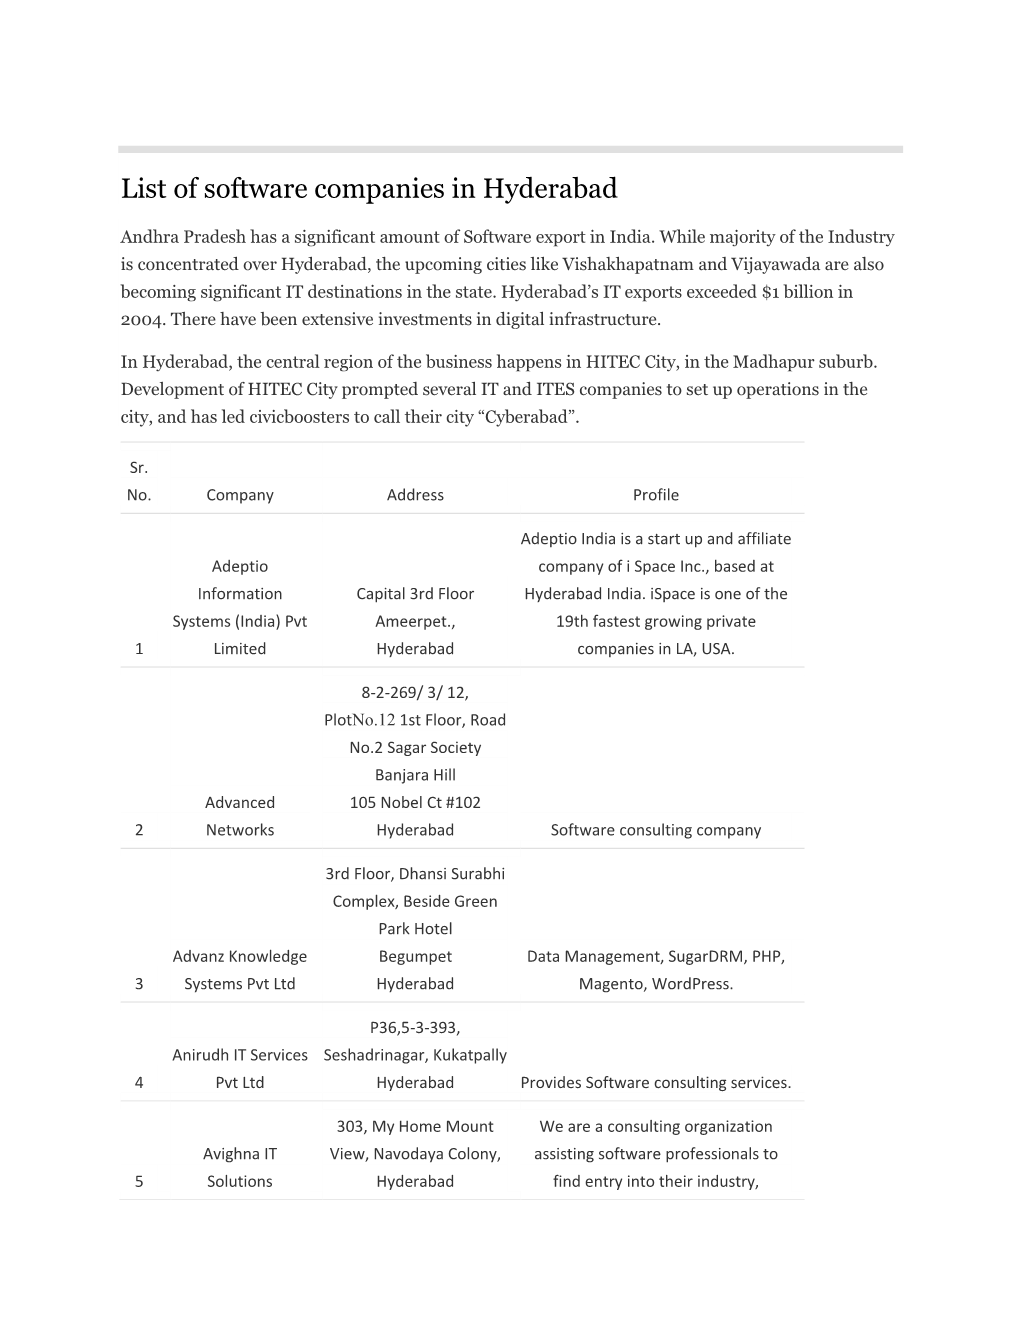 List of Software Companies in Hyderabad